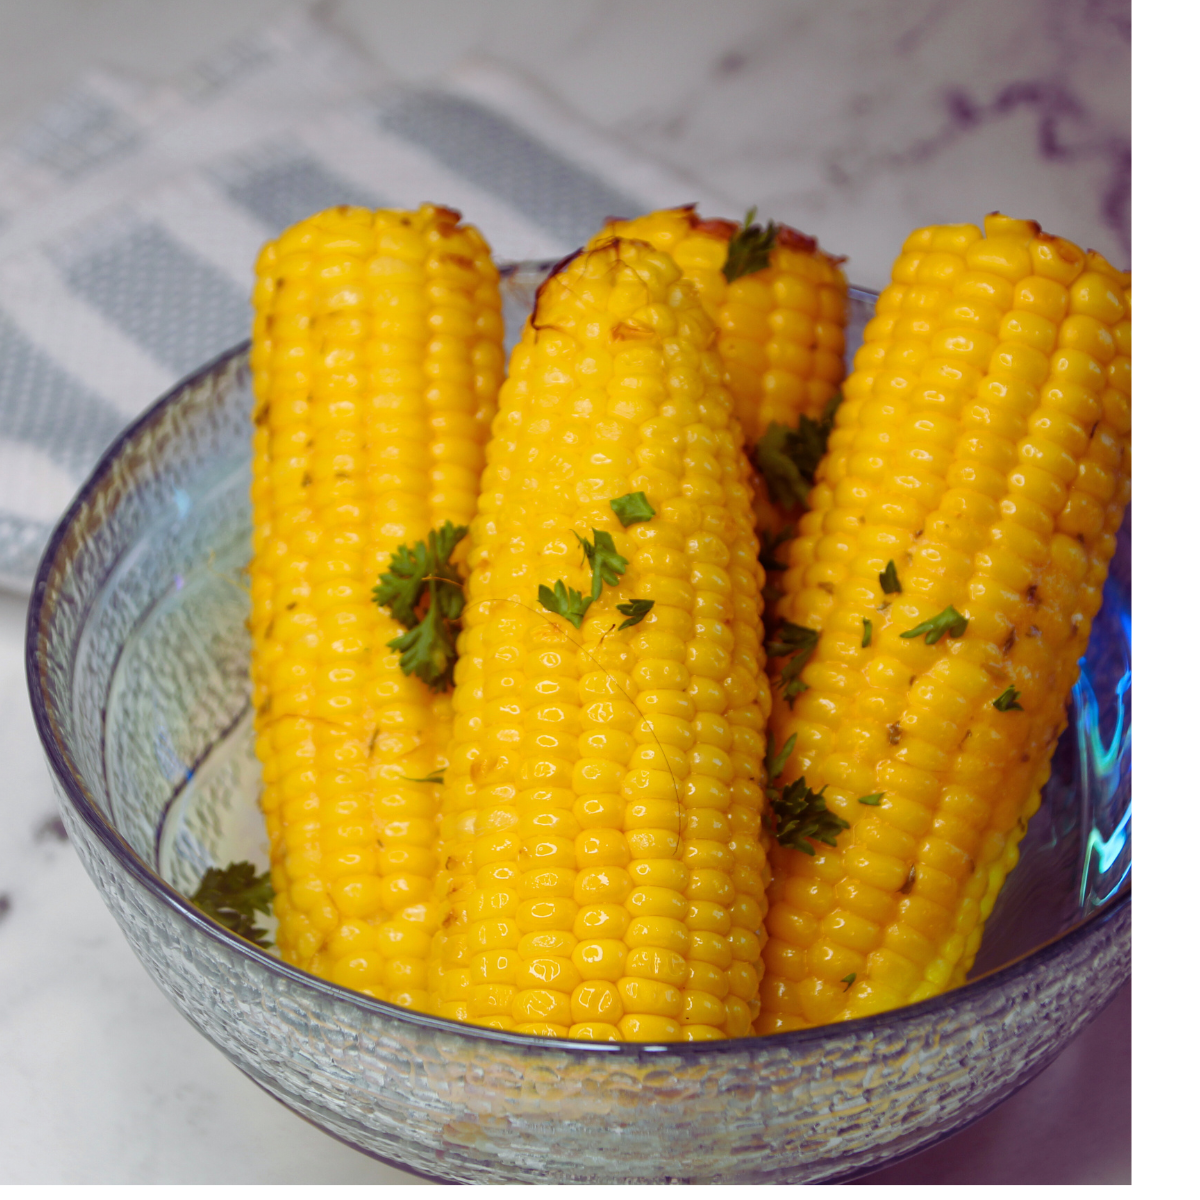 closeup: cooked corn on the cob in a glass bowl